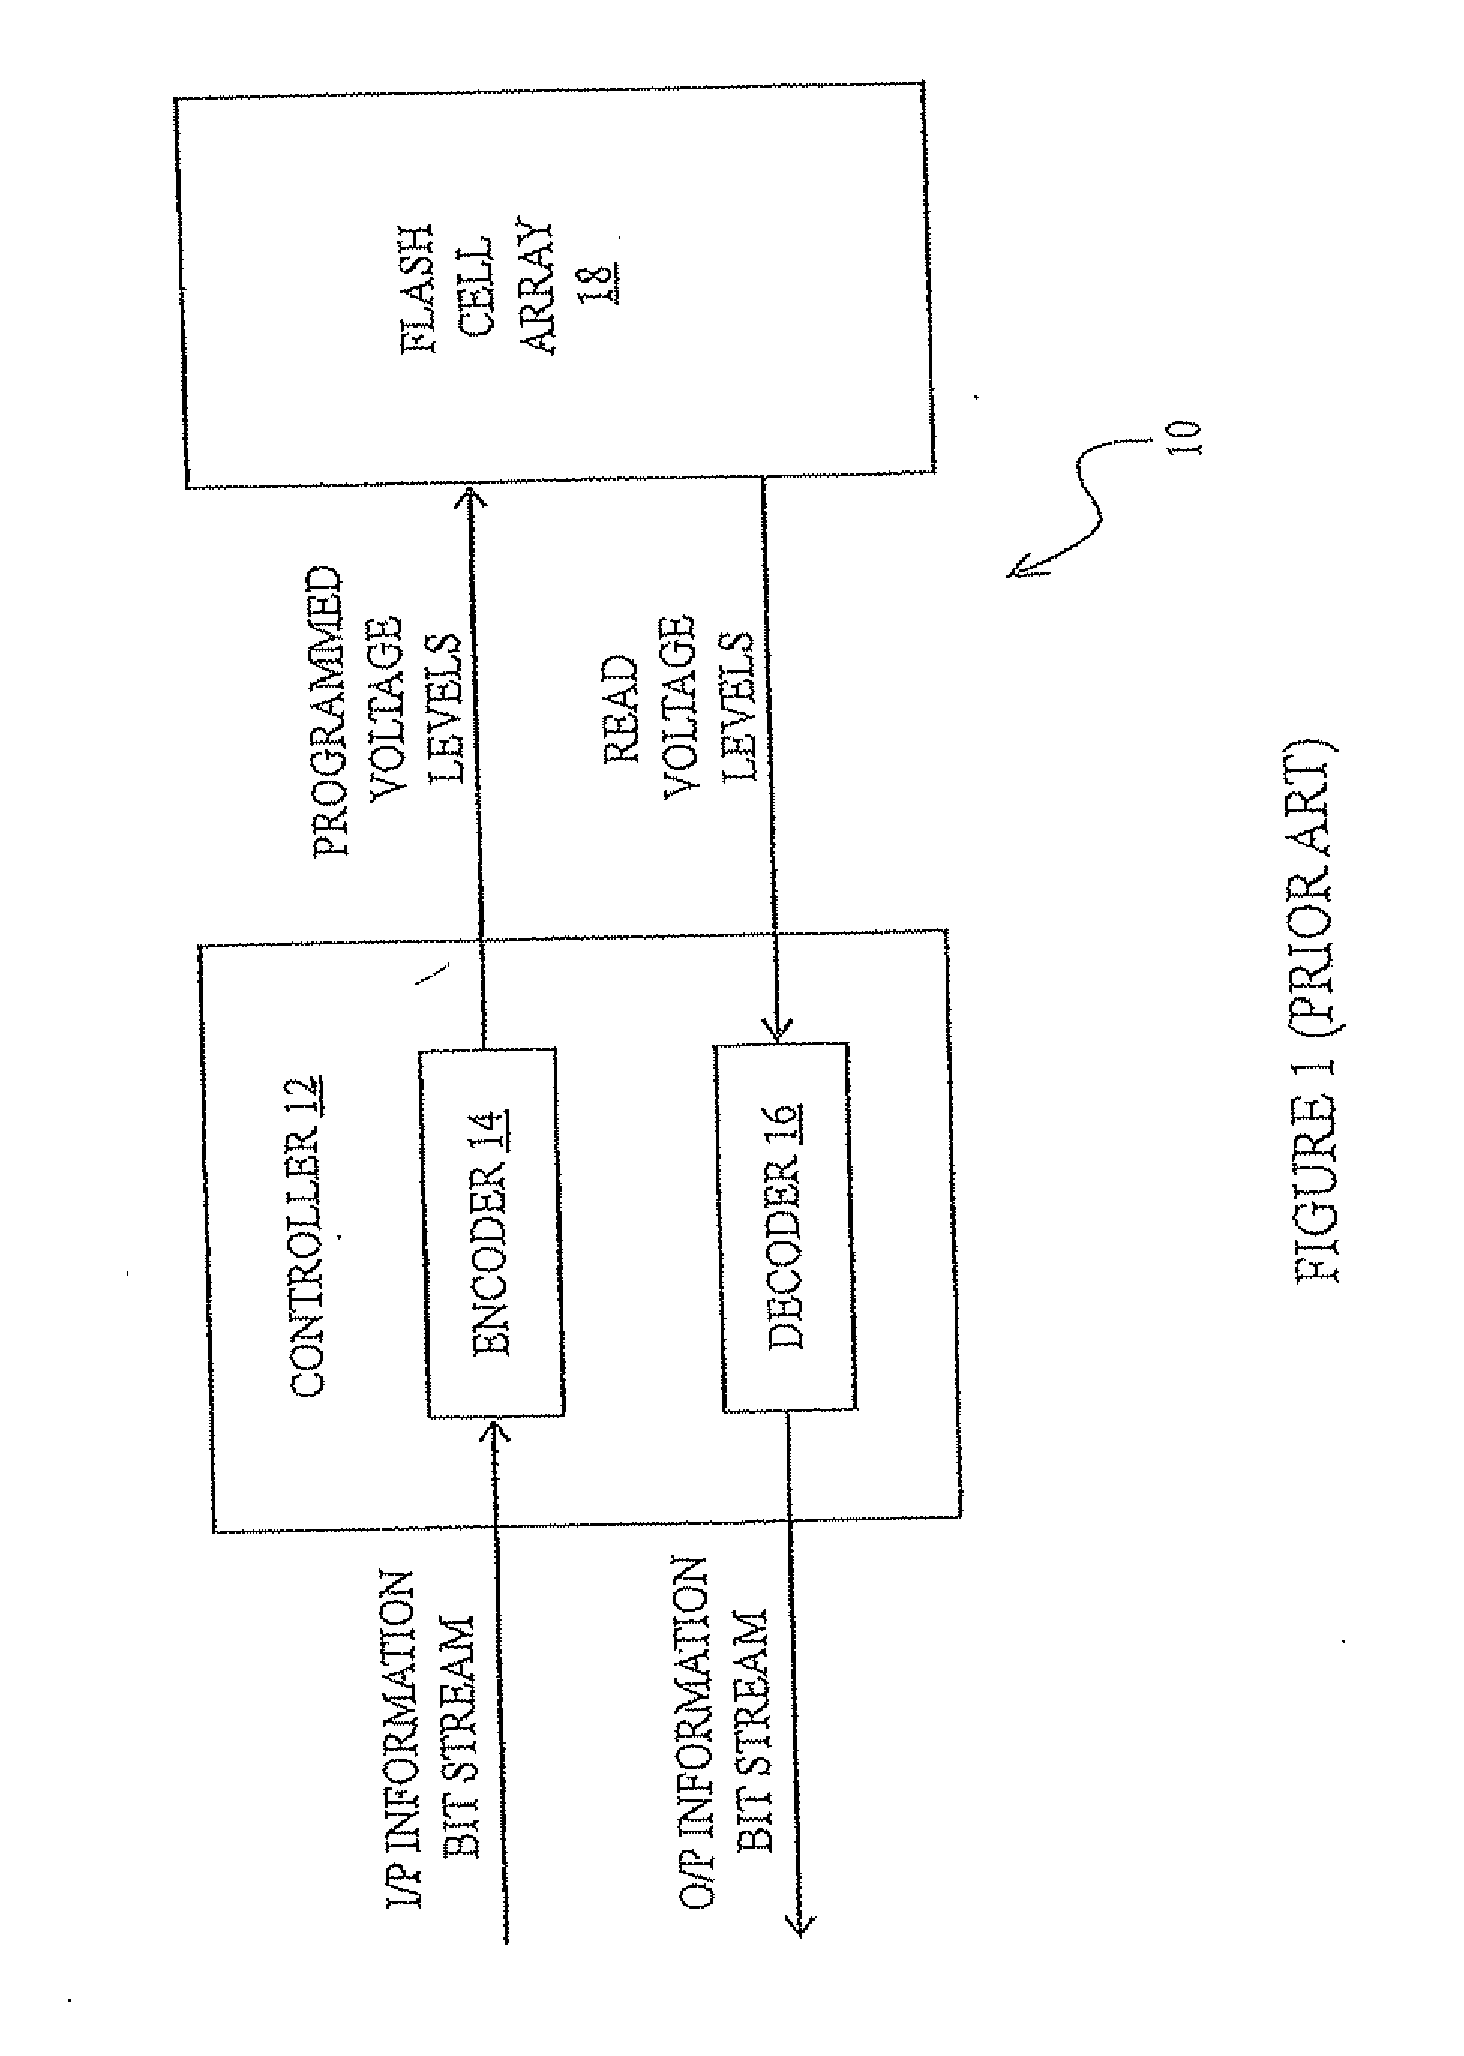 Multi-bit-per-cell flash memory device with non-bijective mapping